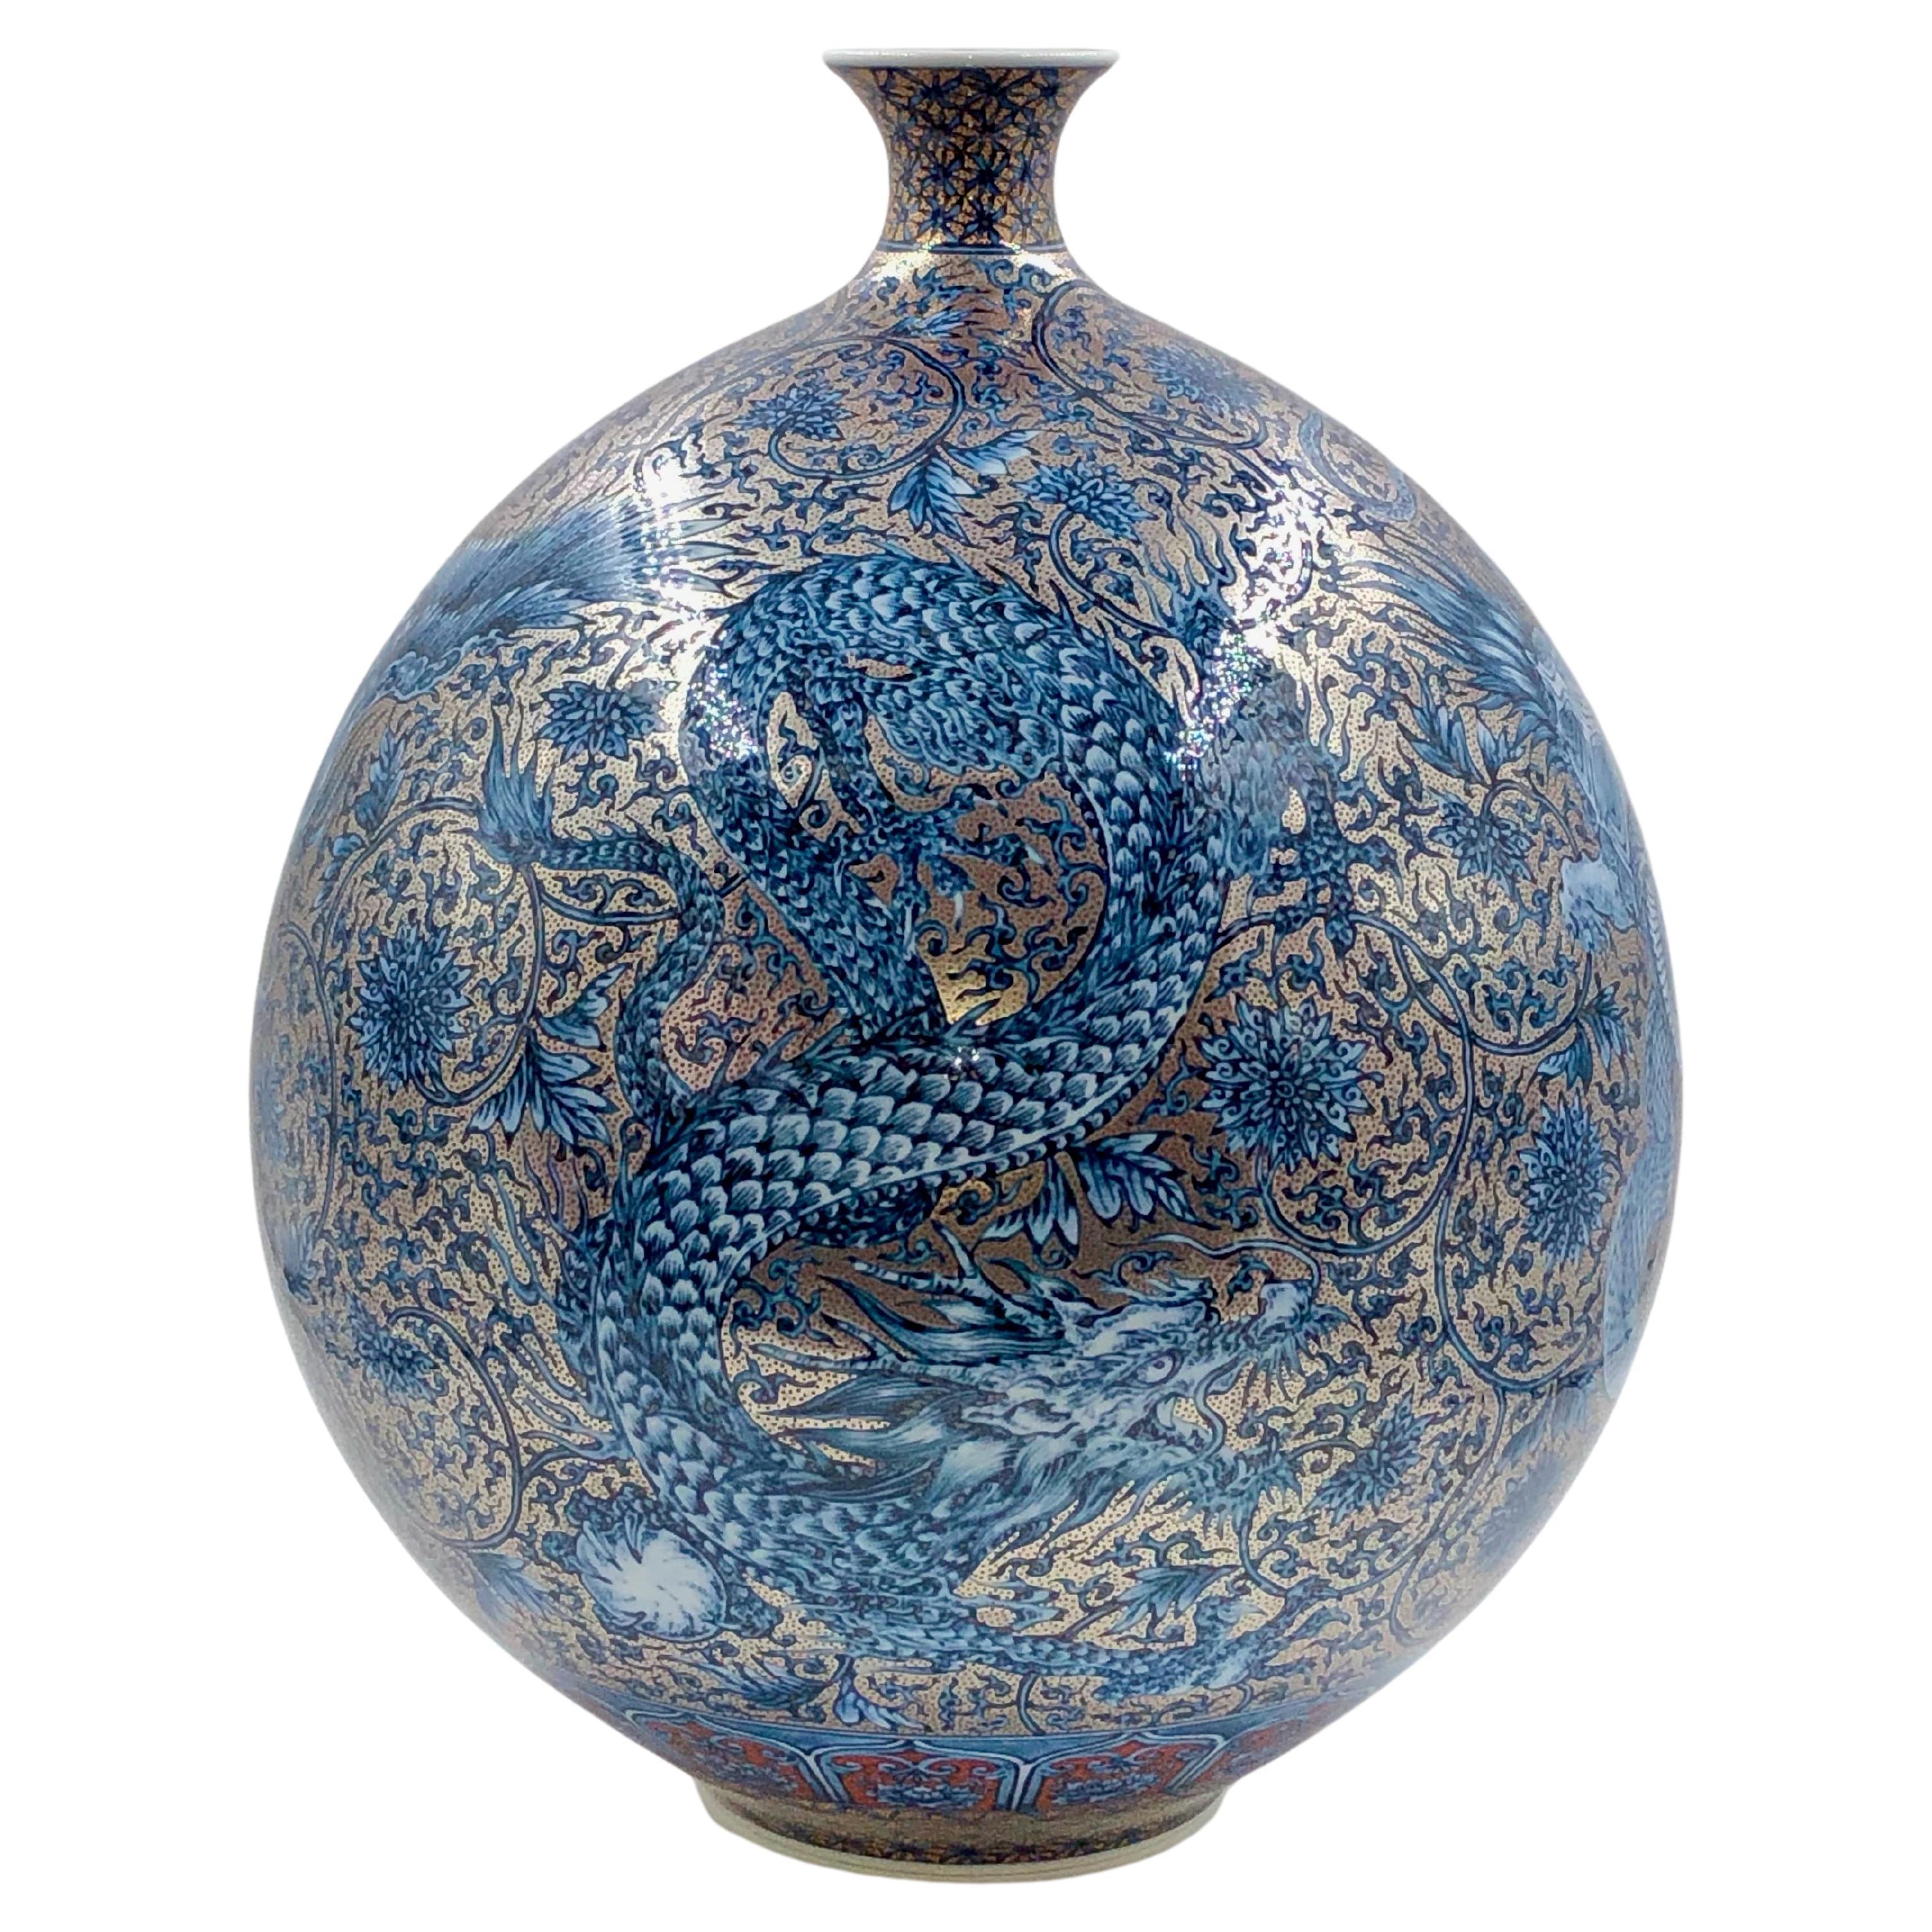 Extraordinary Japanese contemporary highly collectible museum quality highly detailed, extremely intricately hand painted porcelain vase in blue, red and platinum, showcasing the four auspicious creatures of Chinese mythology said to be the